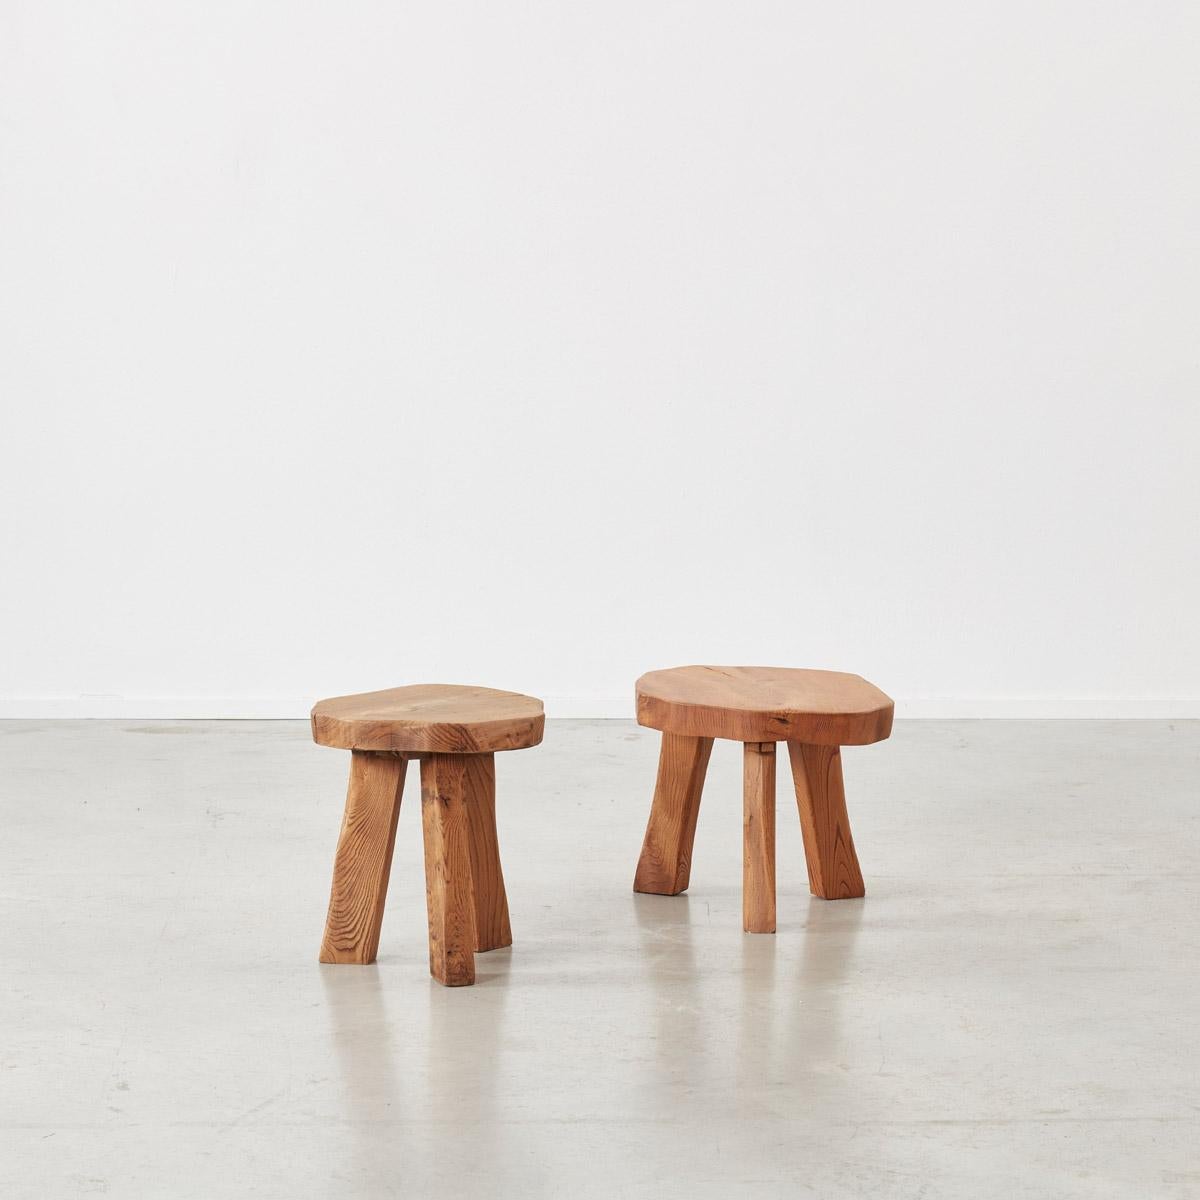 Pair of Primitivist Wooden Stools Wanderwood, France, Early 20th Century 3